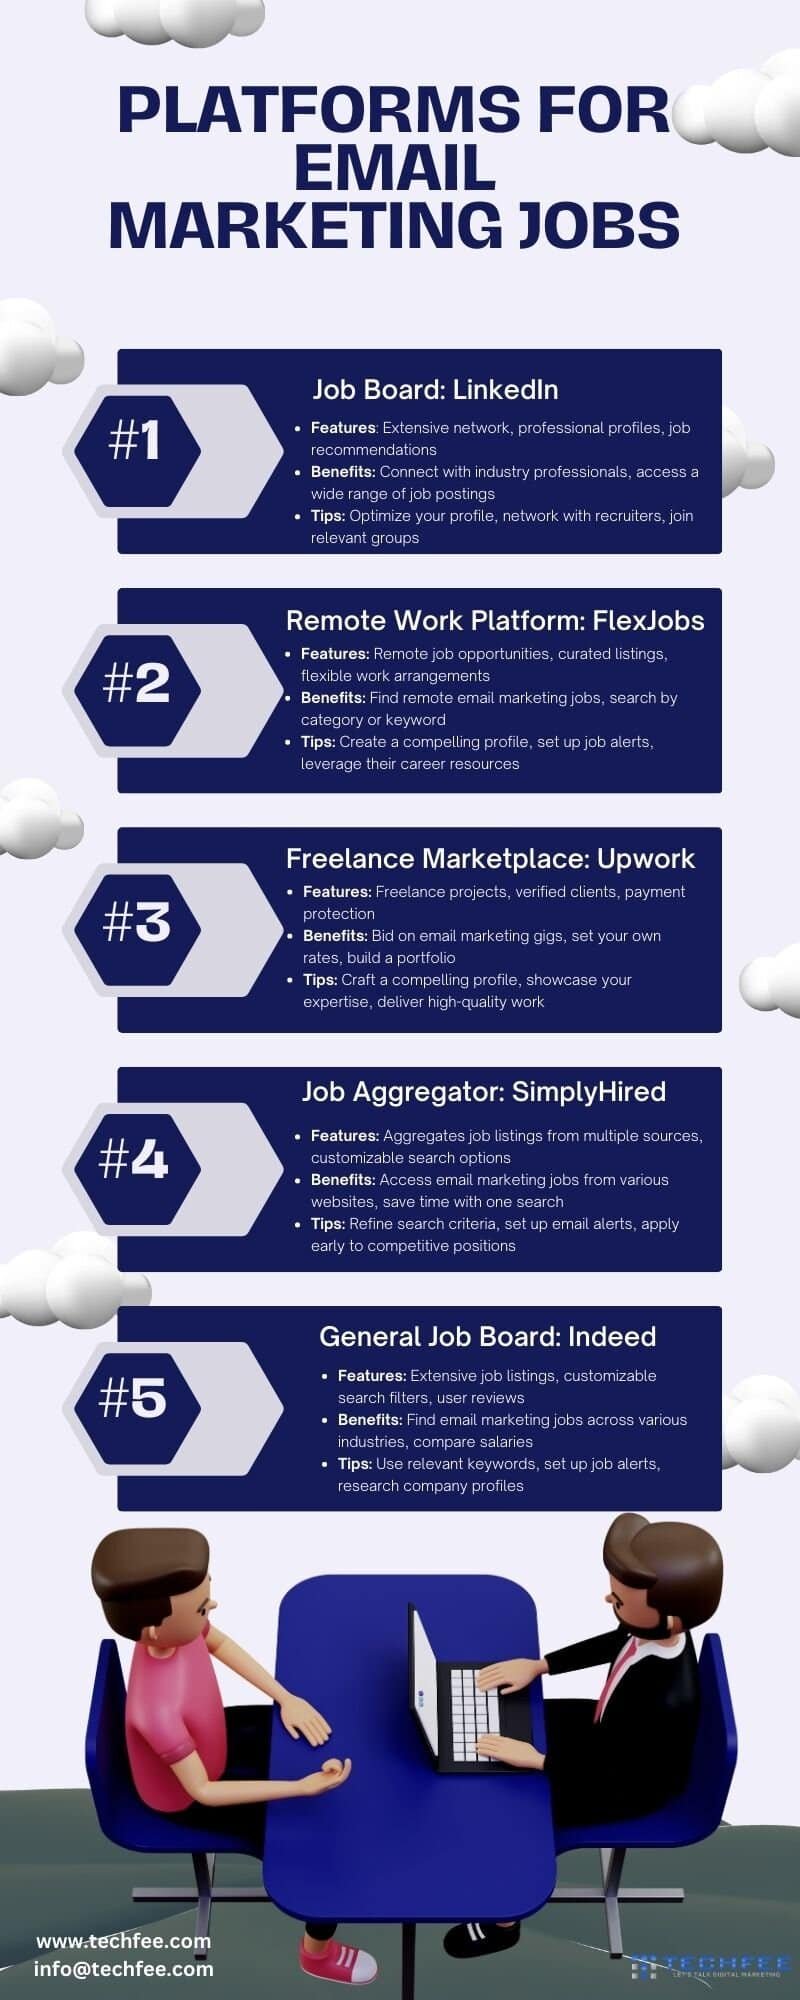 platforms-for-email-marketing-jobs